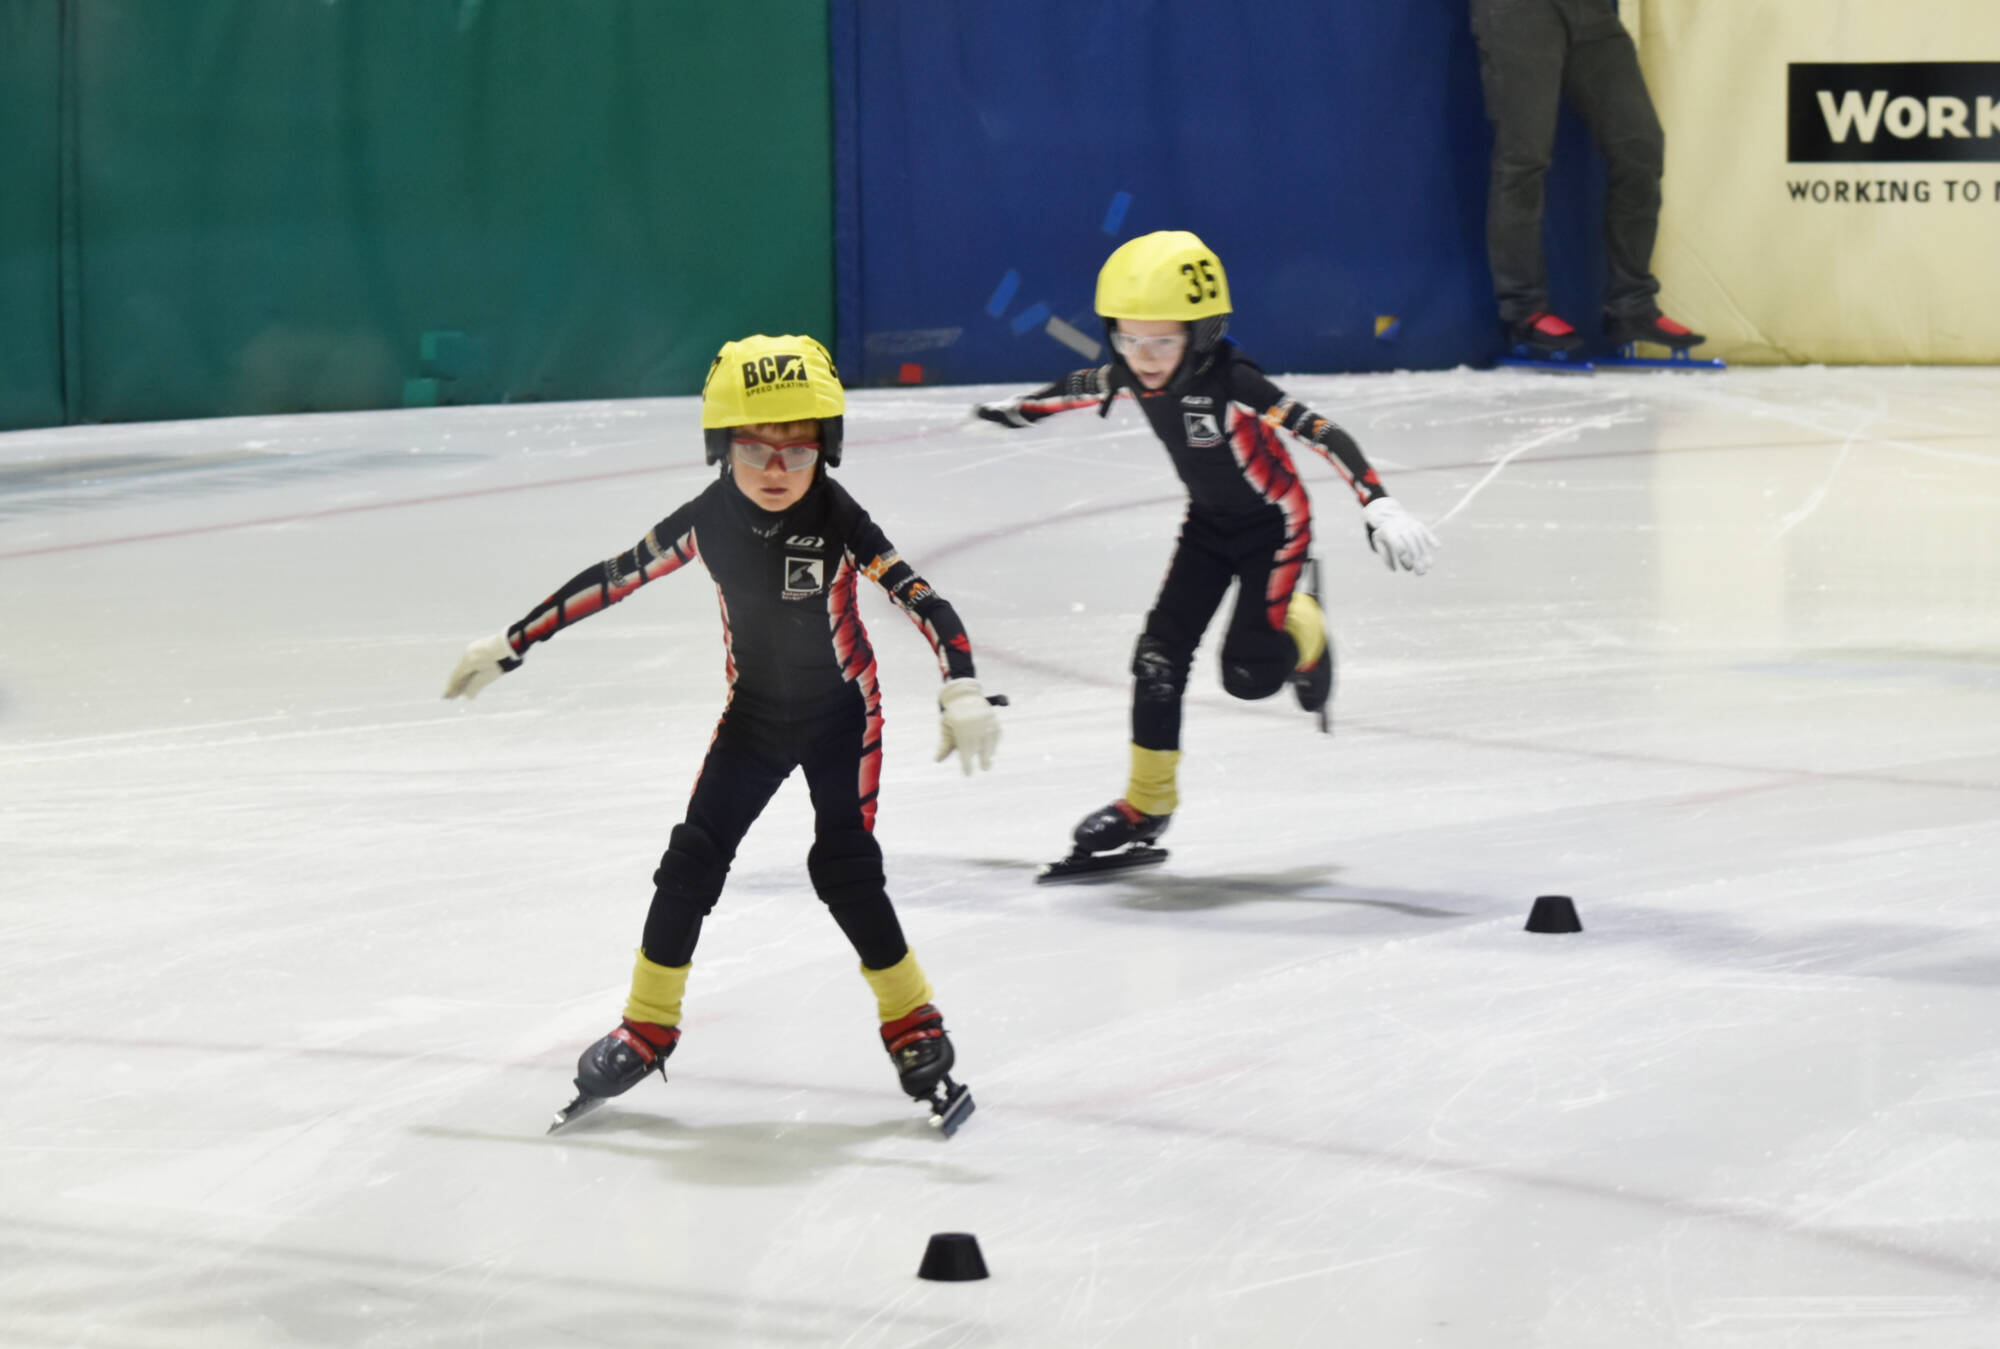 Salmon Arm speed skaters Wilbur Folkman and Orin Belcher battle it out for the win in the 200 metre heat at the Salmon Arm Interior FUNale Saturday, Feb. 11, 2023. (Rebecca Willson- Salmon Arm Observer)